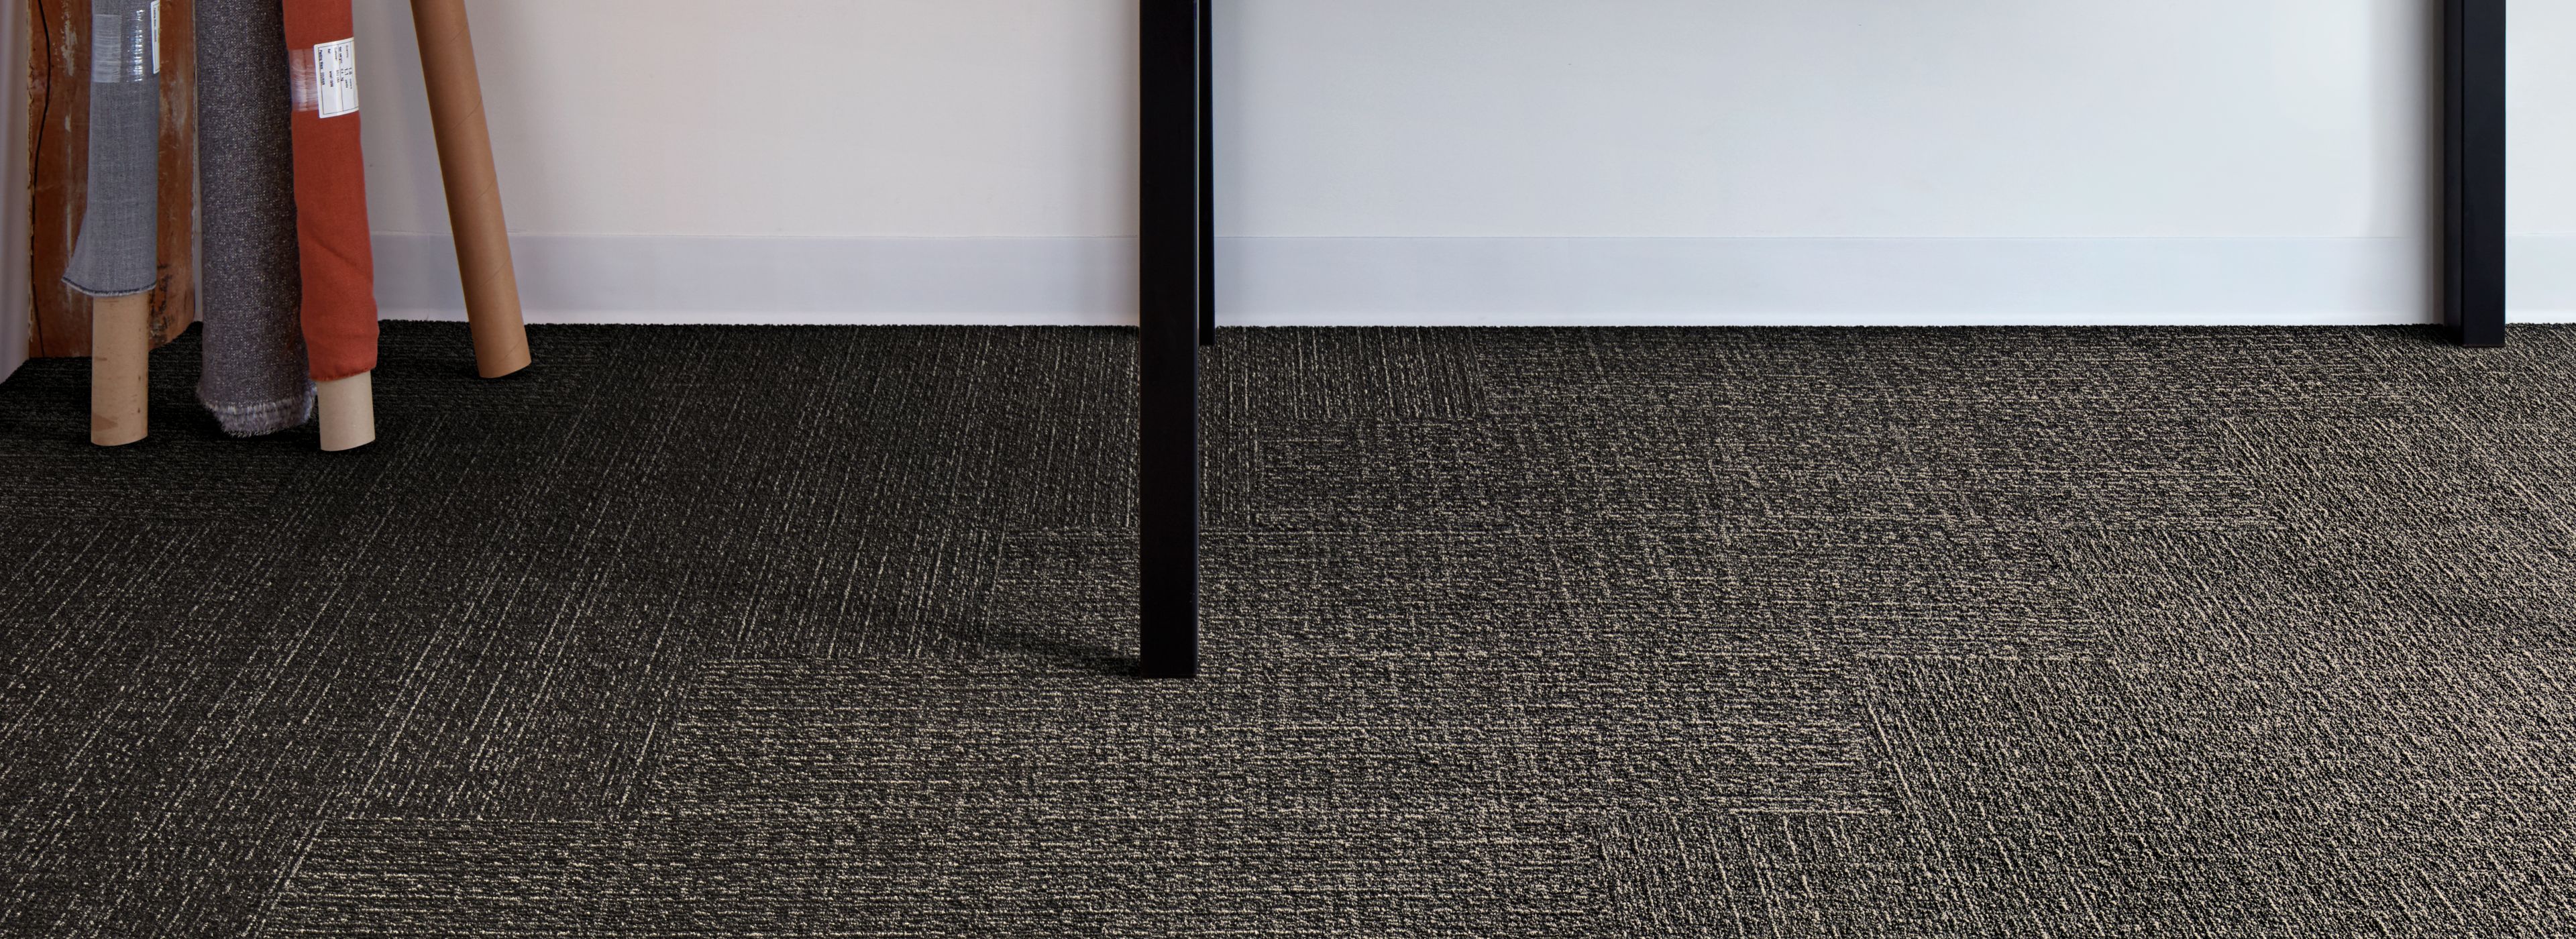 Interface Shishu Stitch and Shade plank carpet tile in workspace with table Bildnummer 1